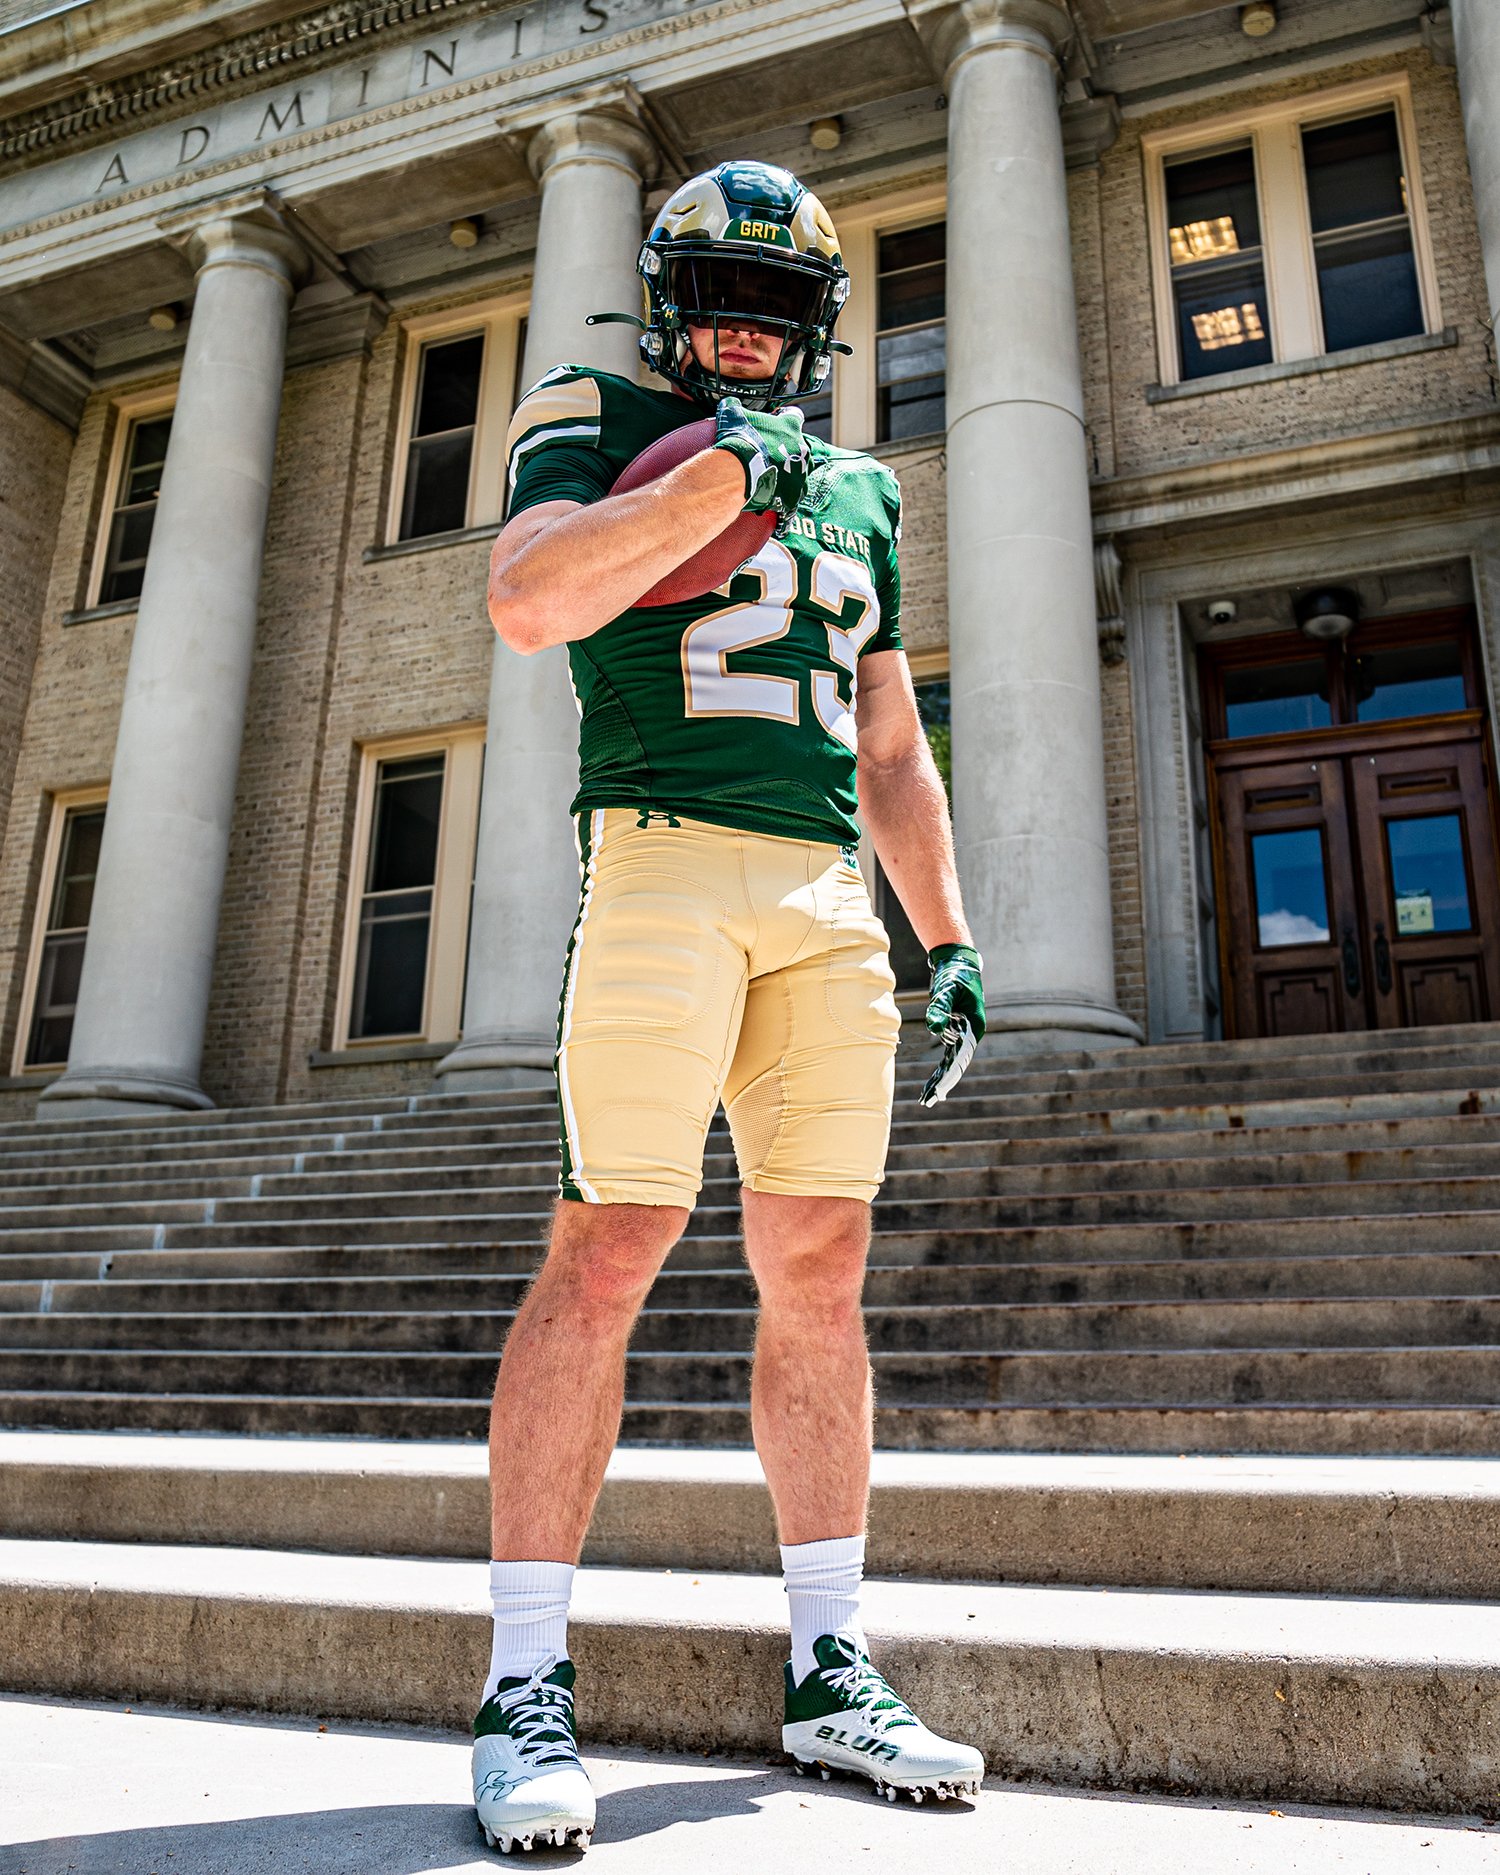 See the new Colorado State football uniforms